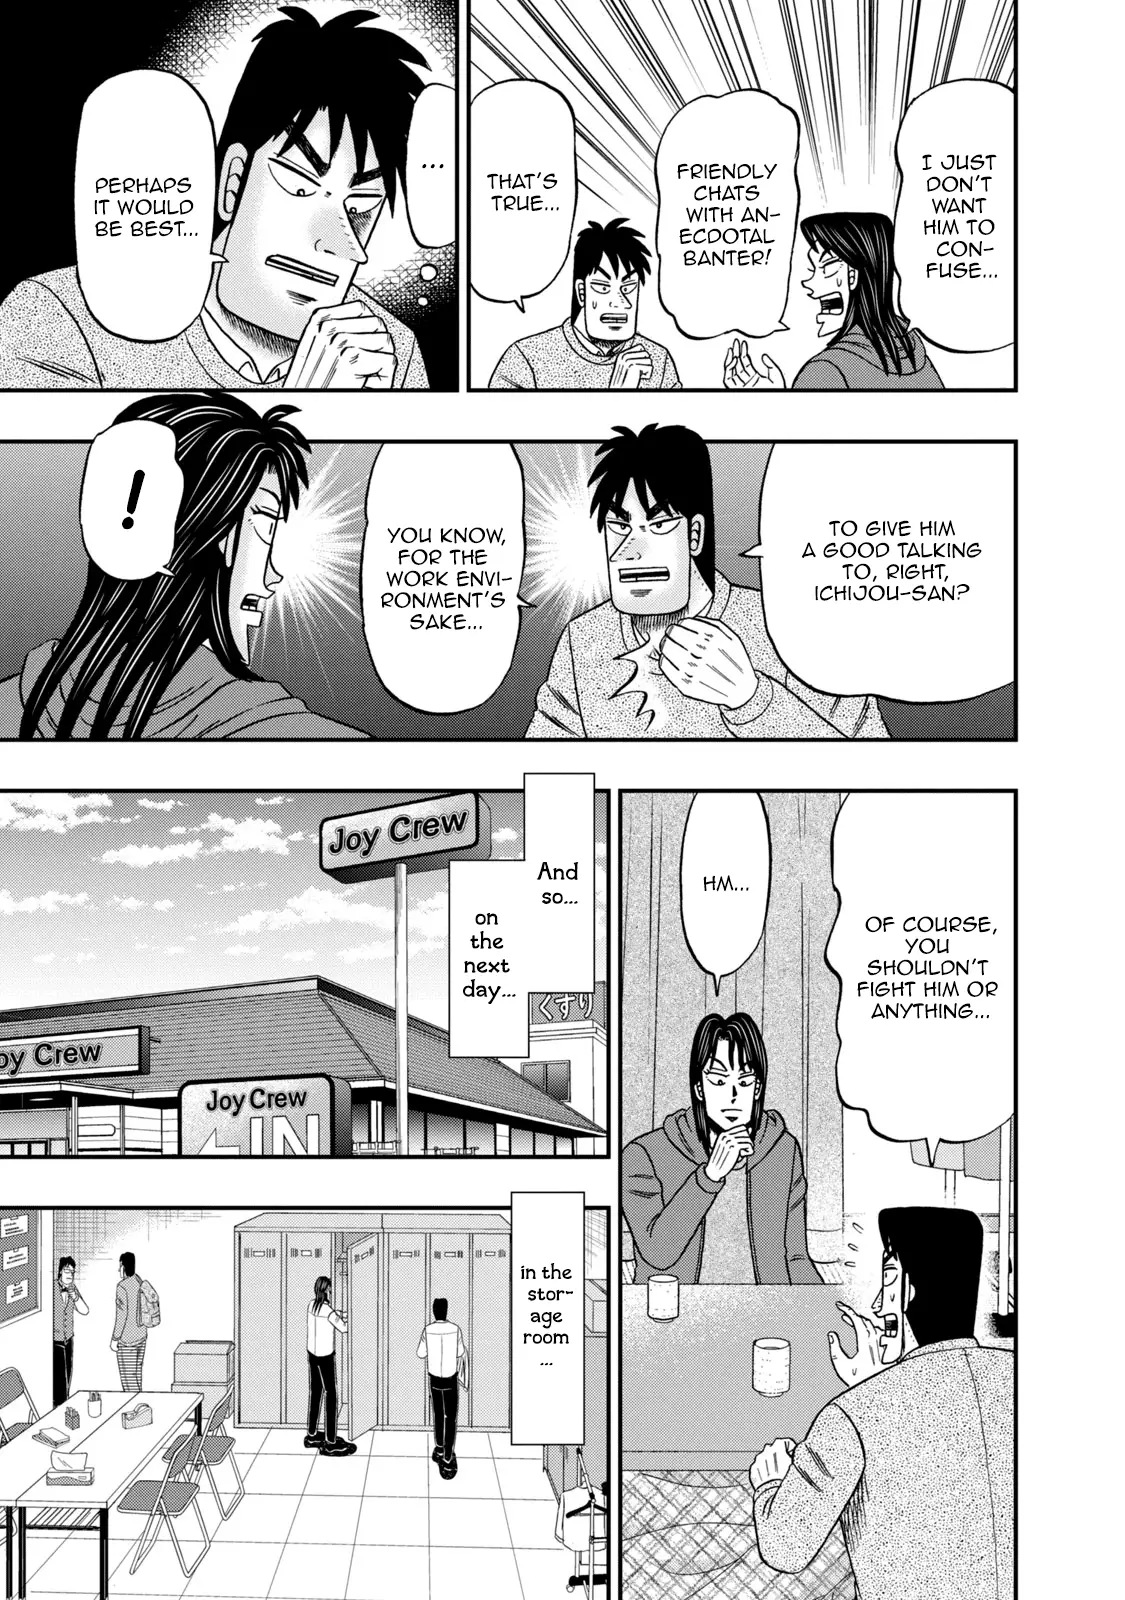 Life In Tokyo Ichijou - 5 page 11-a8f8b3e4